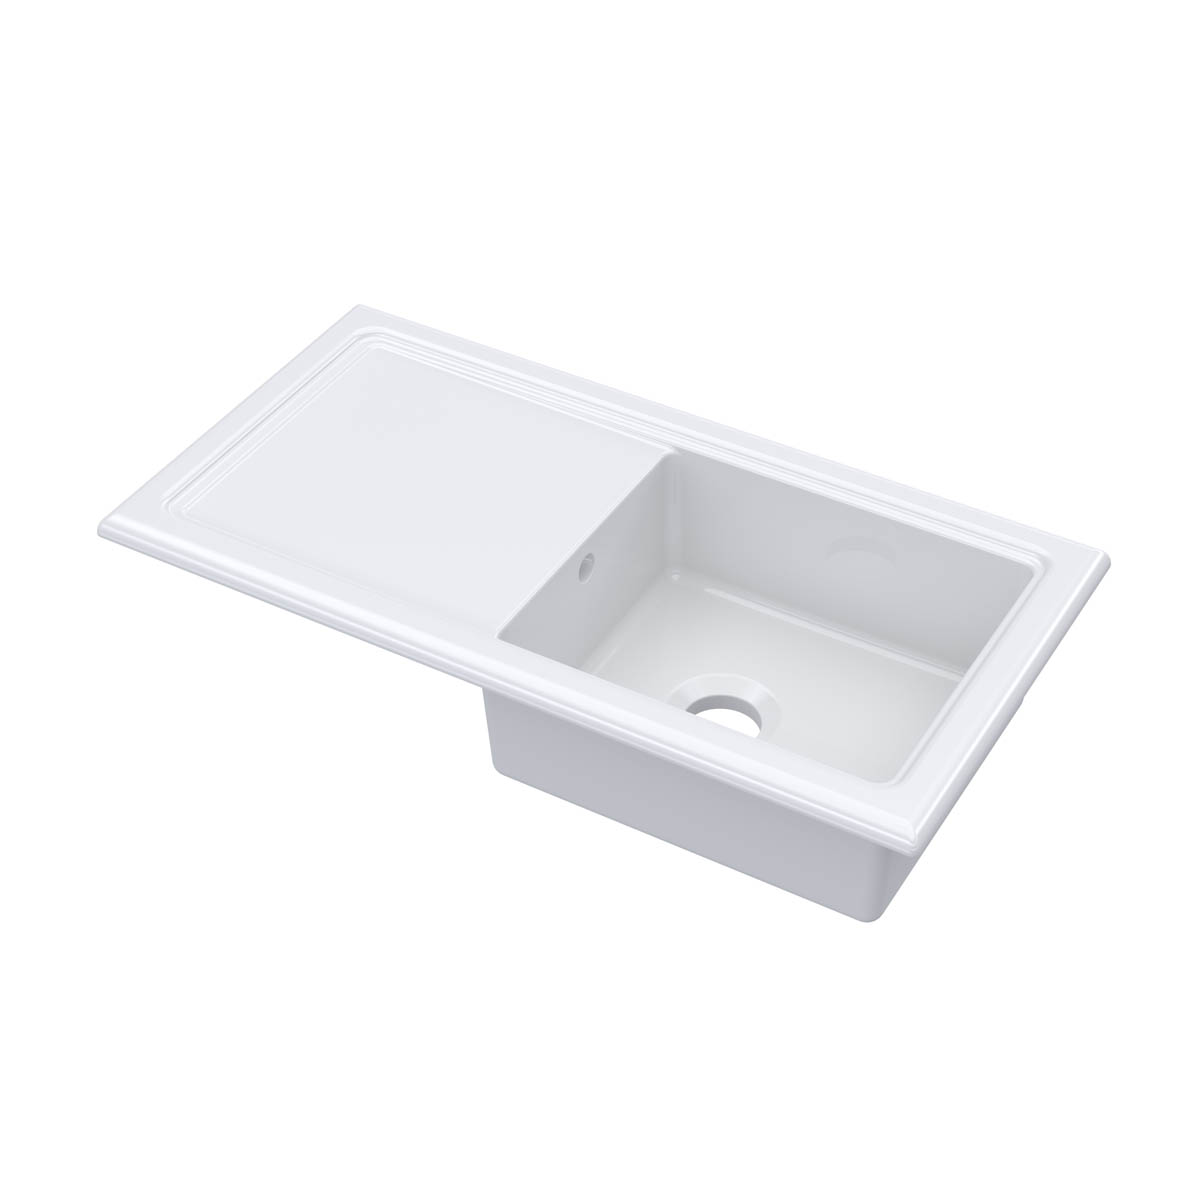 Nuie 1010x525mm 1 Bowl Counter Top Sink - White (20310)